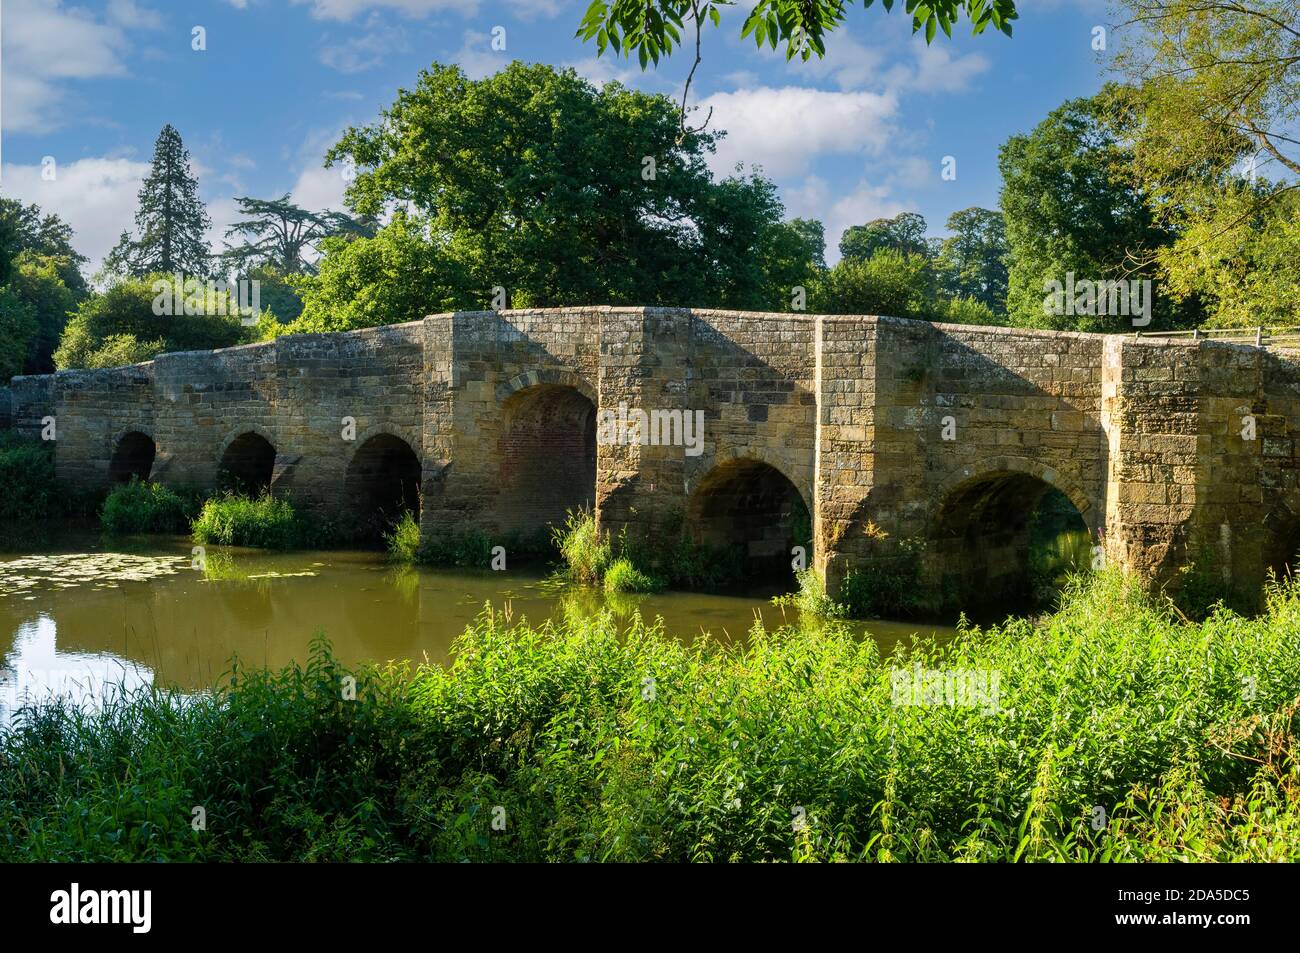 Stopham Bridge over the River Arun near Pulborough is a listed building (Historic England 1354033) built in 1422-3. West Sussex, England, UK. Stock Photo